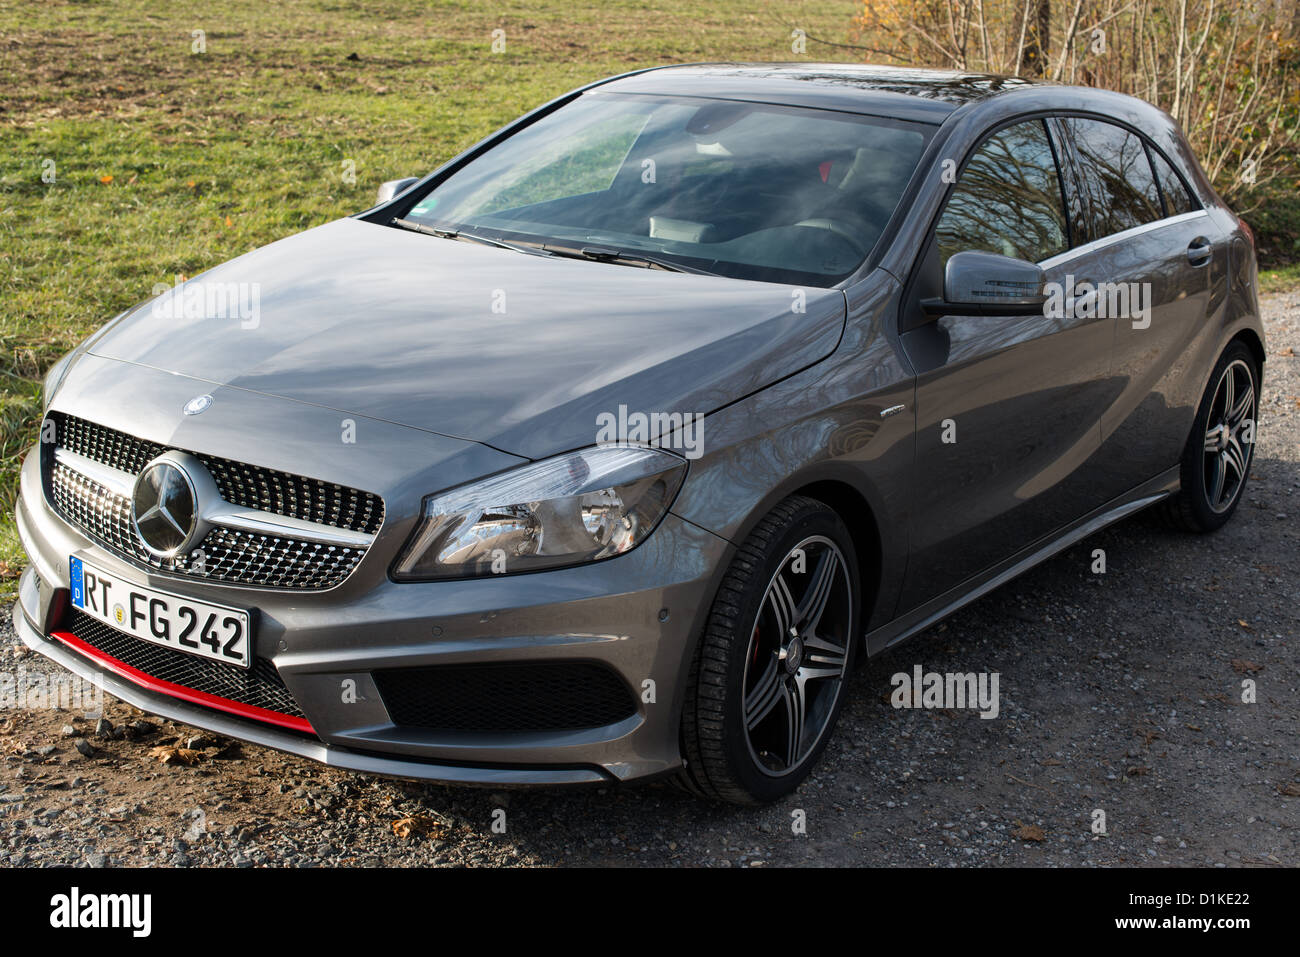 Mercedes A Class Amg High Resolution Stock Photography and Images - Alamy